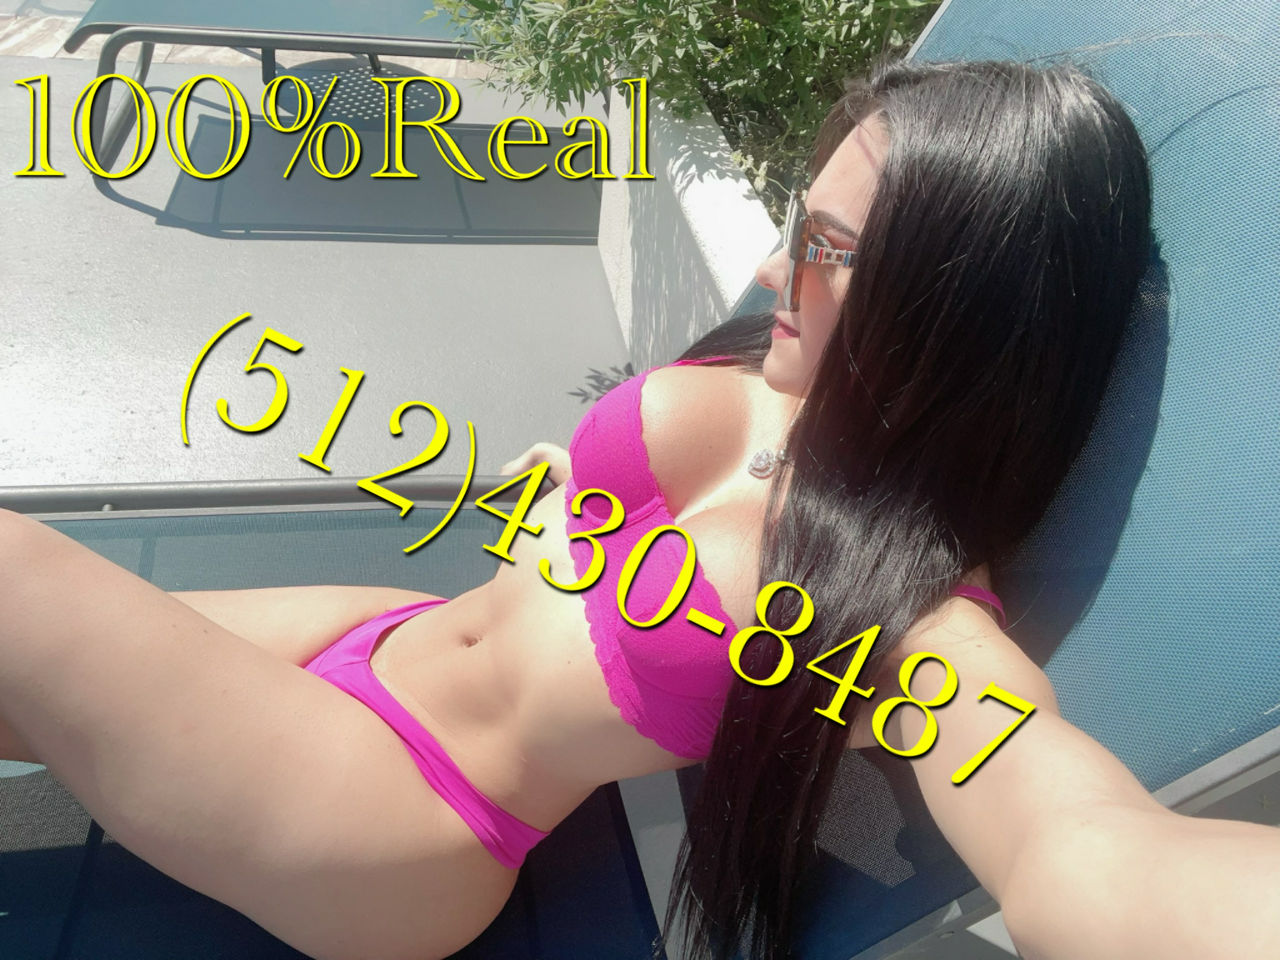 Escorts Secaucus, New Jersey Visiting 2 Days here